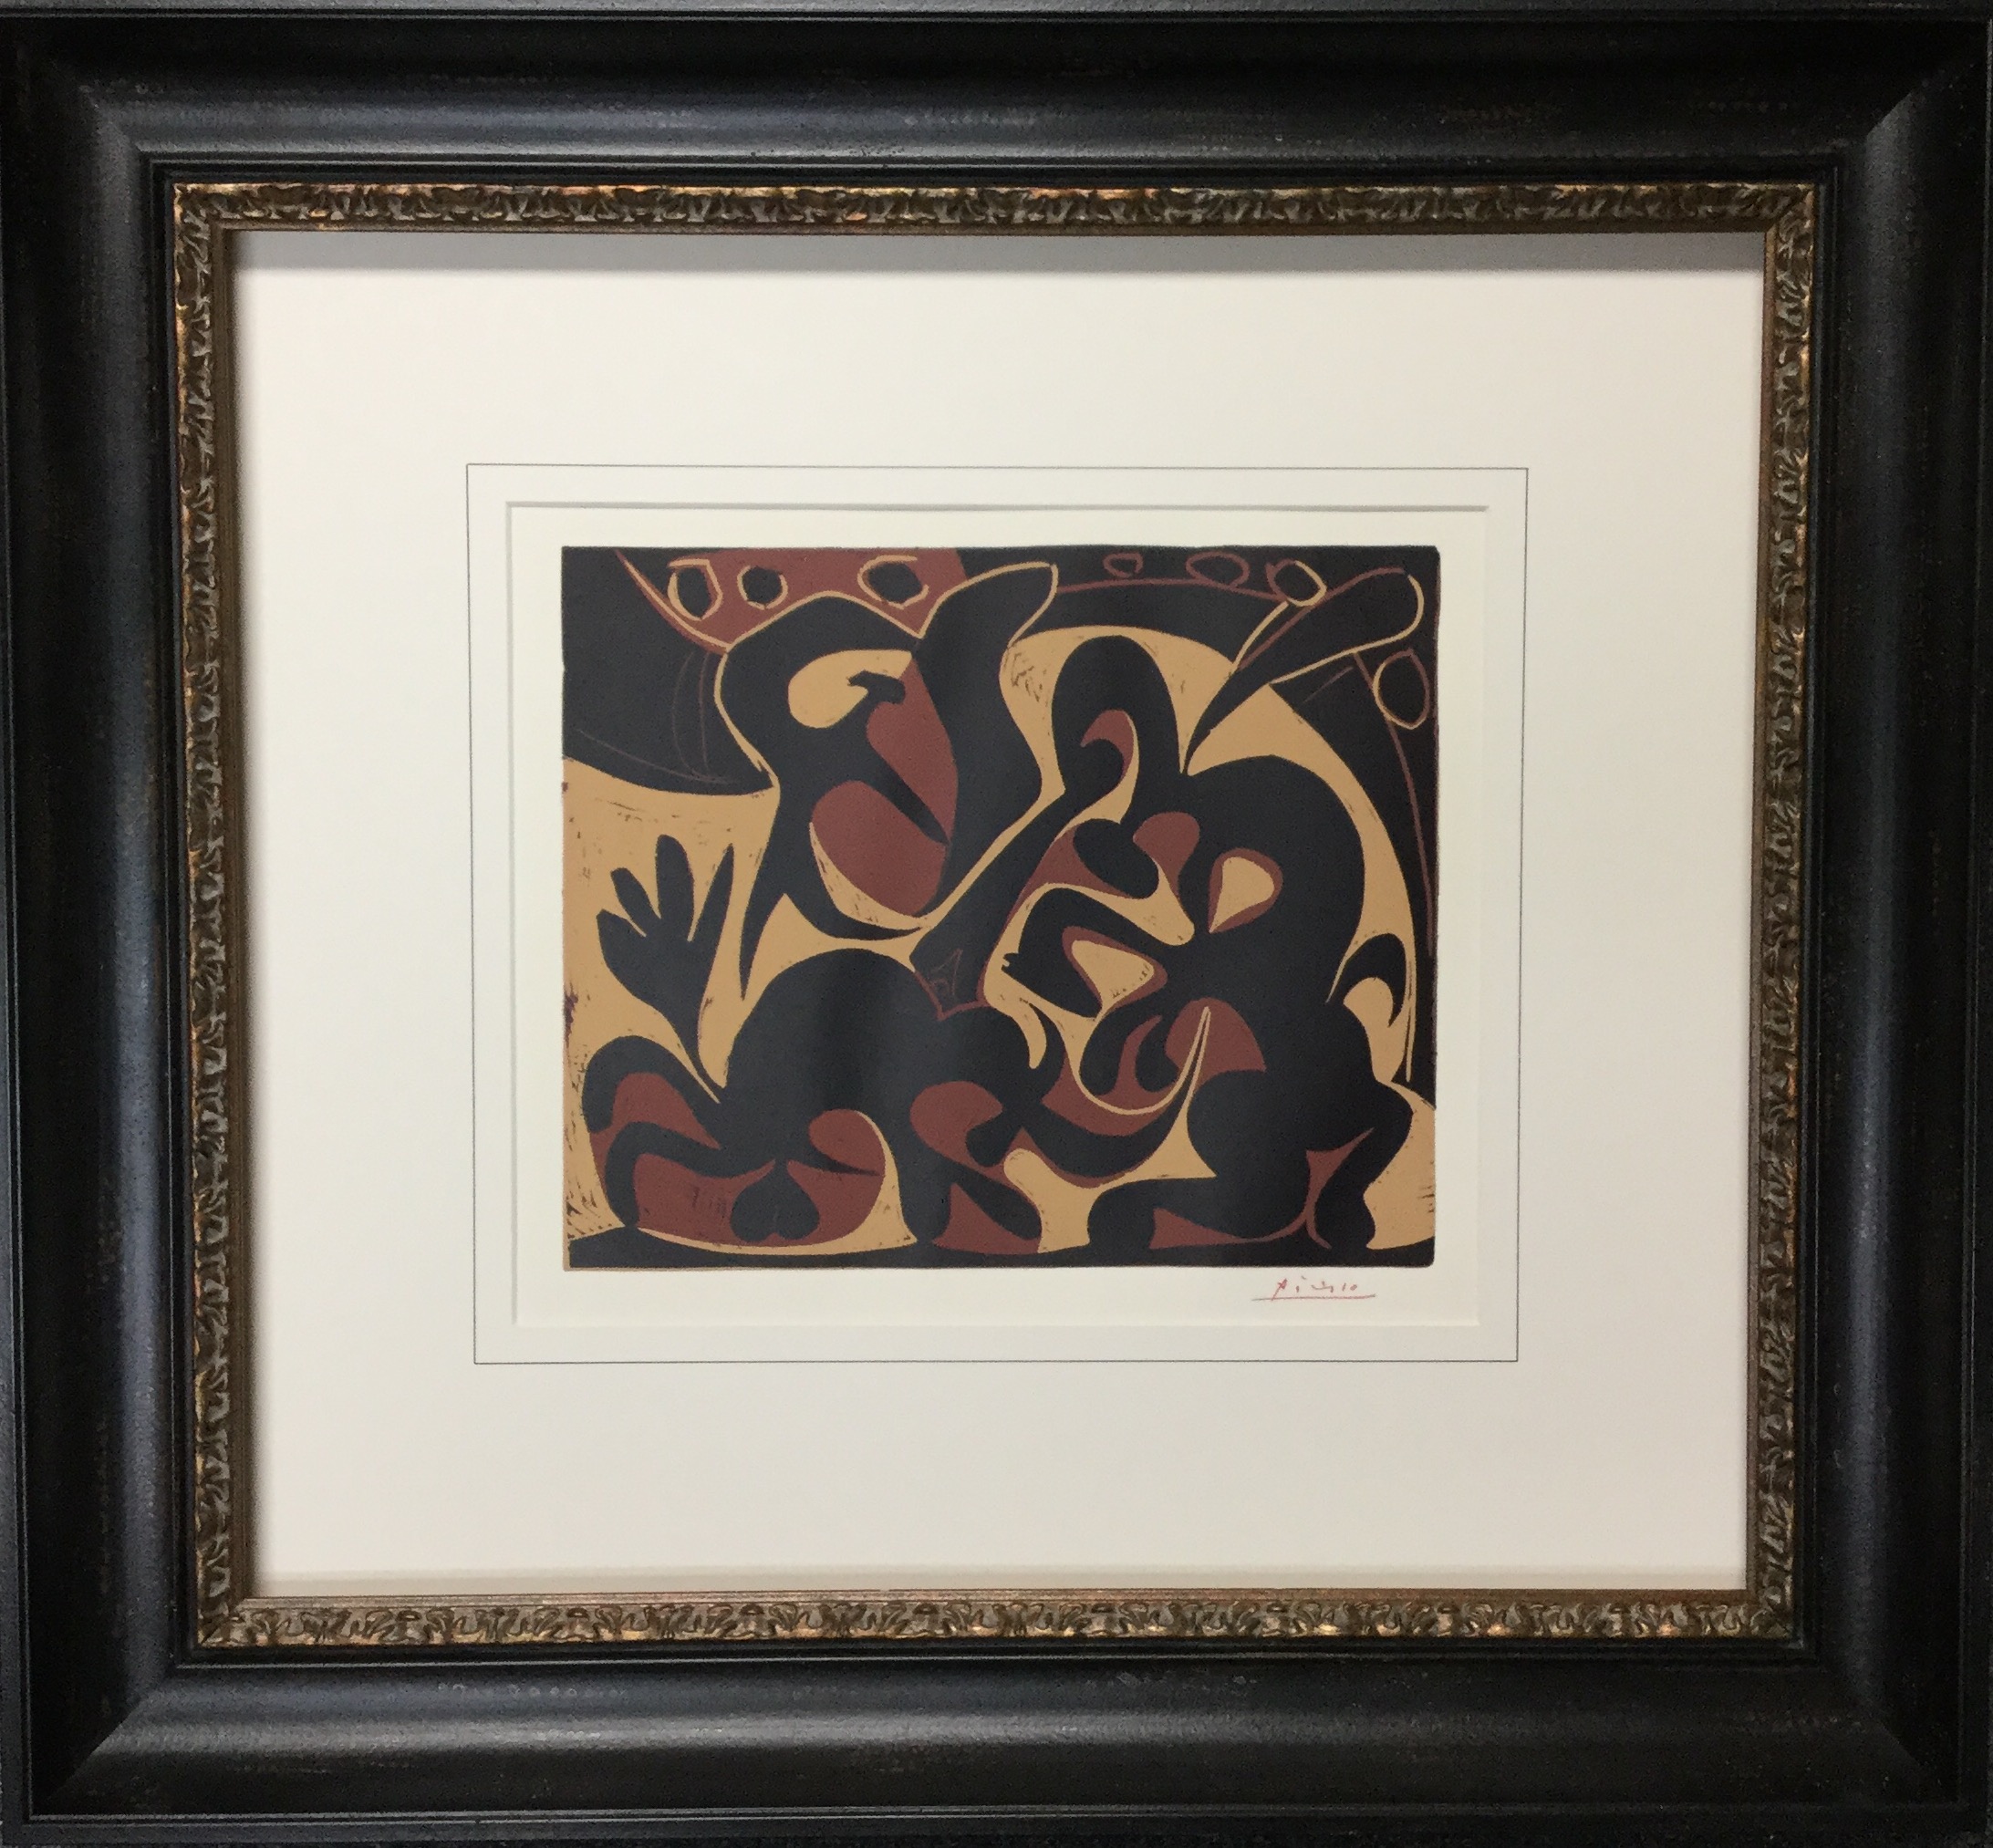 Beautiful french line design for this stunning Picasso print!